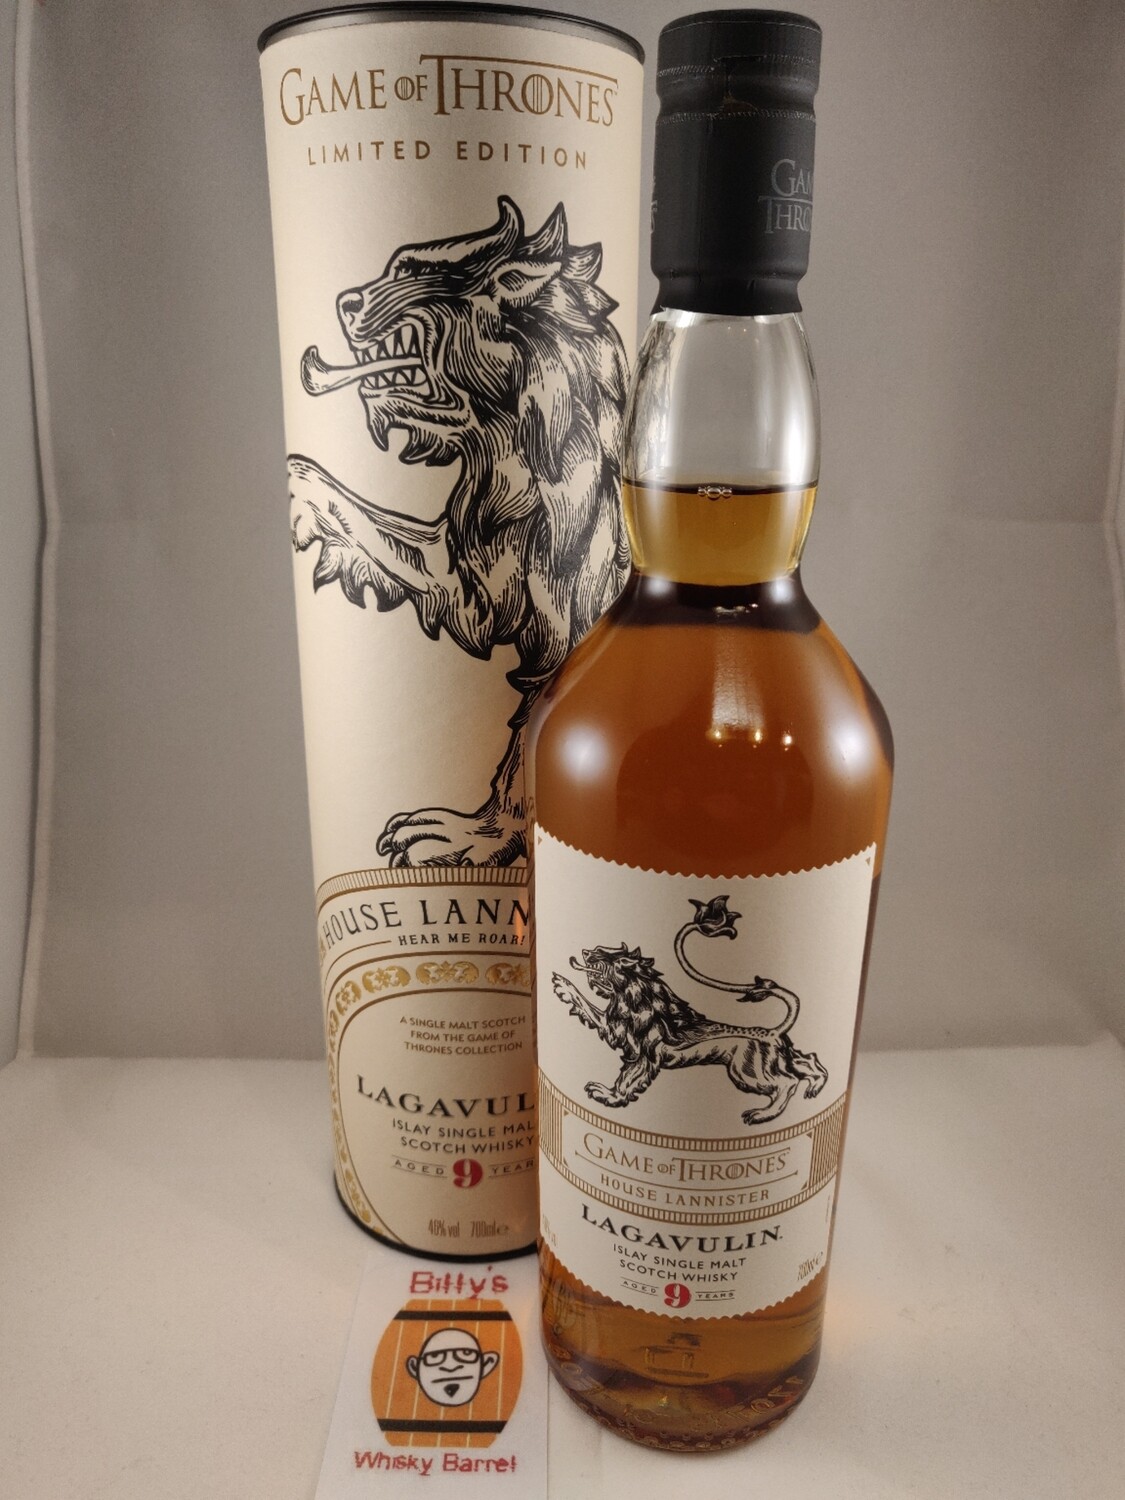 Lagavulin 9 years old Game of Thrones